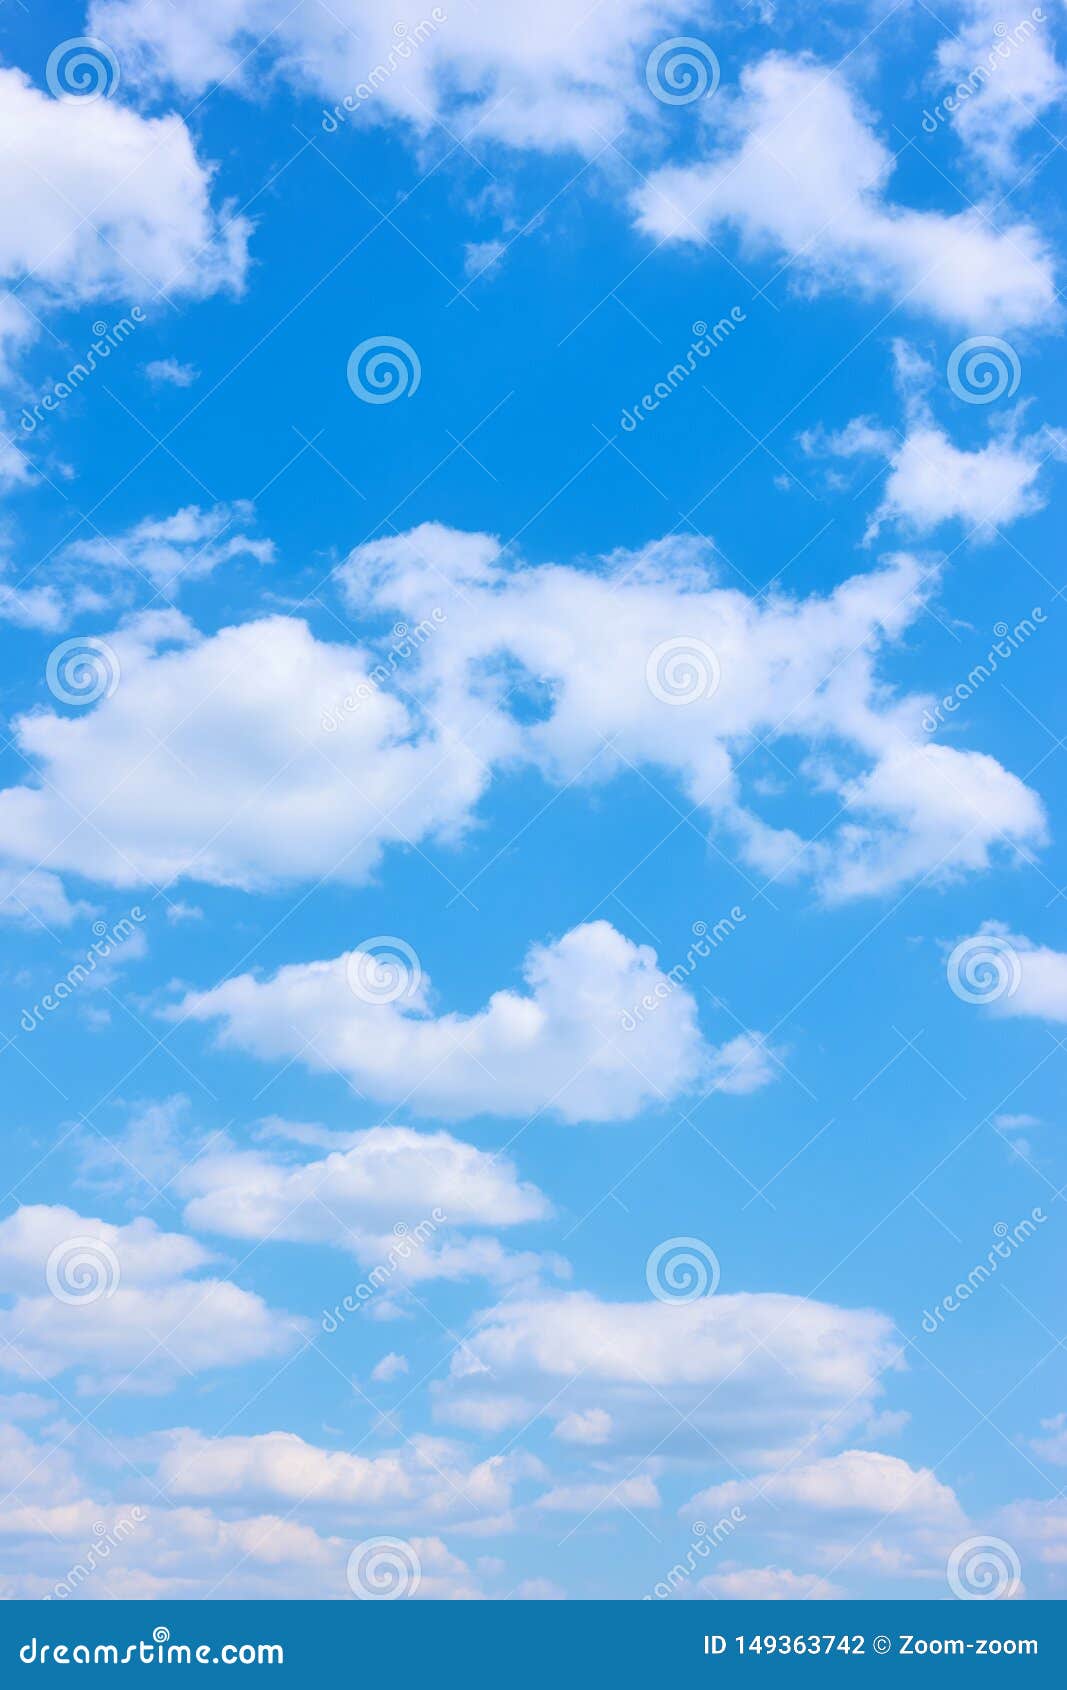 beautyful blue sky with white clouds -  vertical background